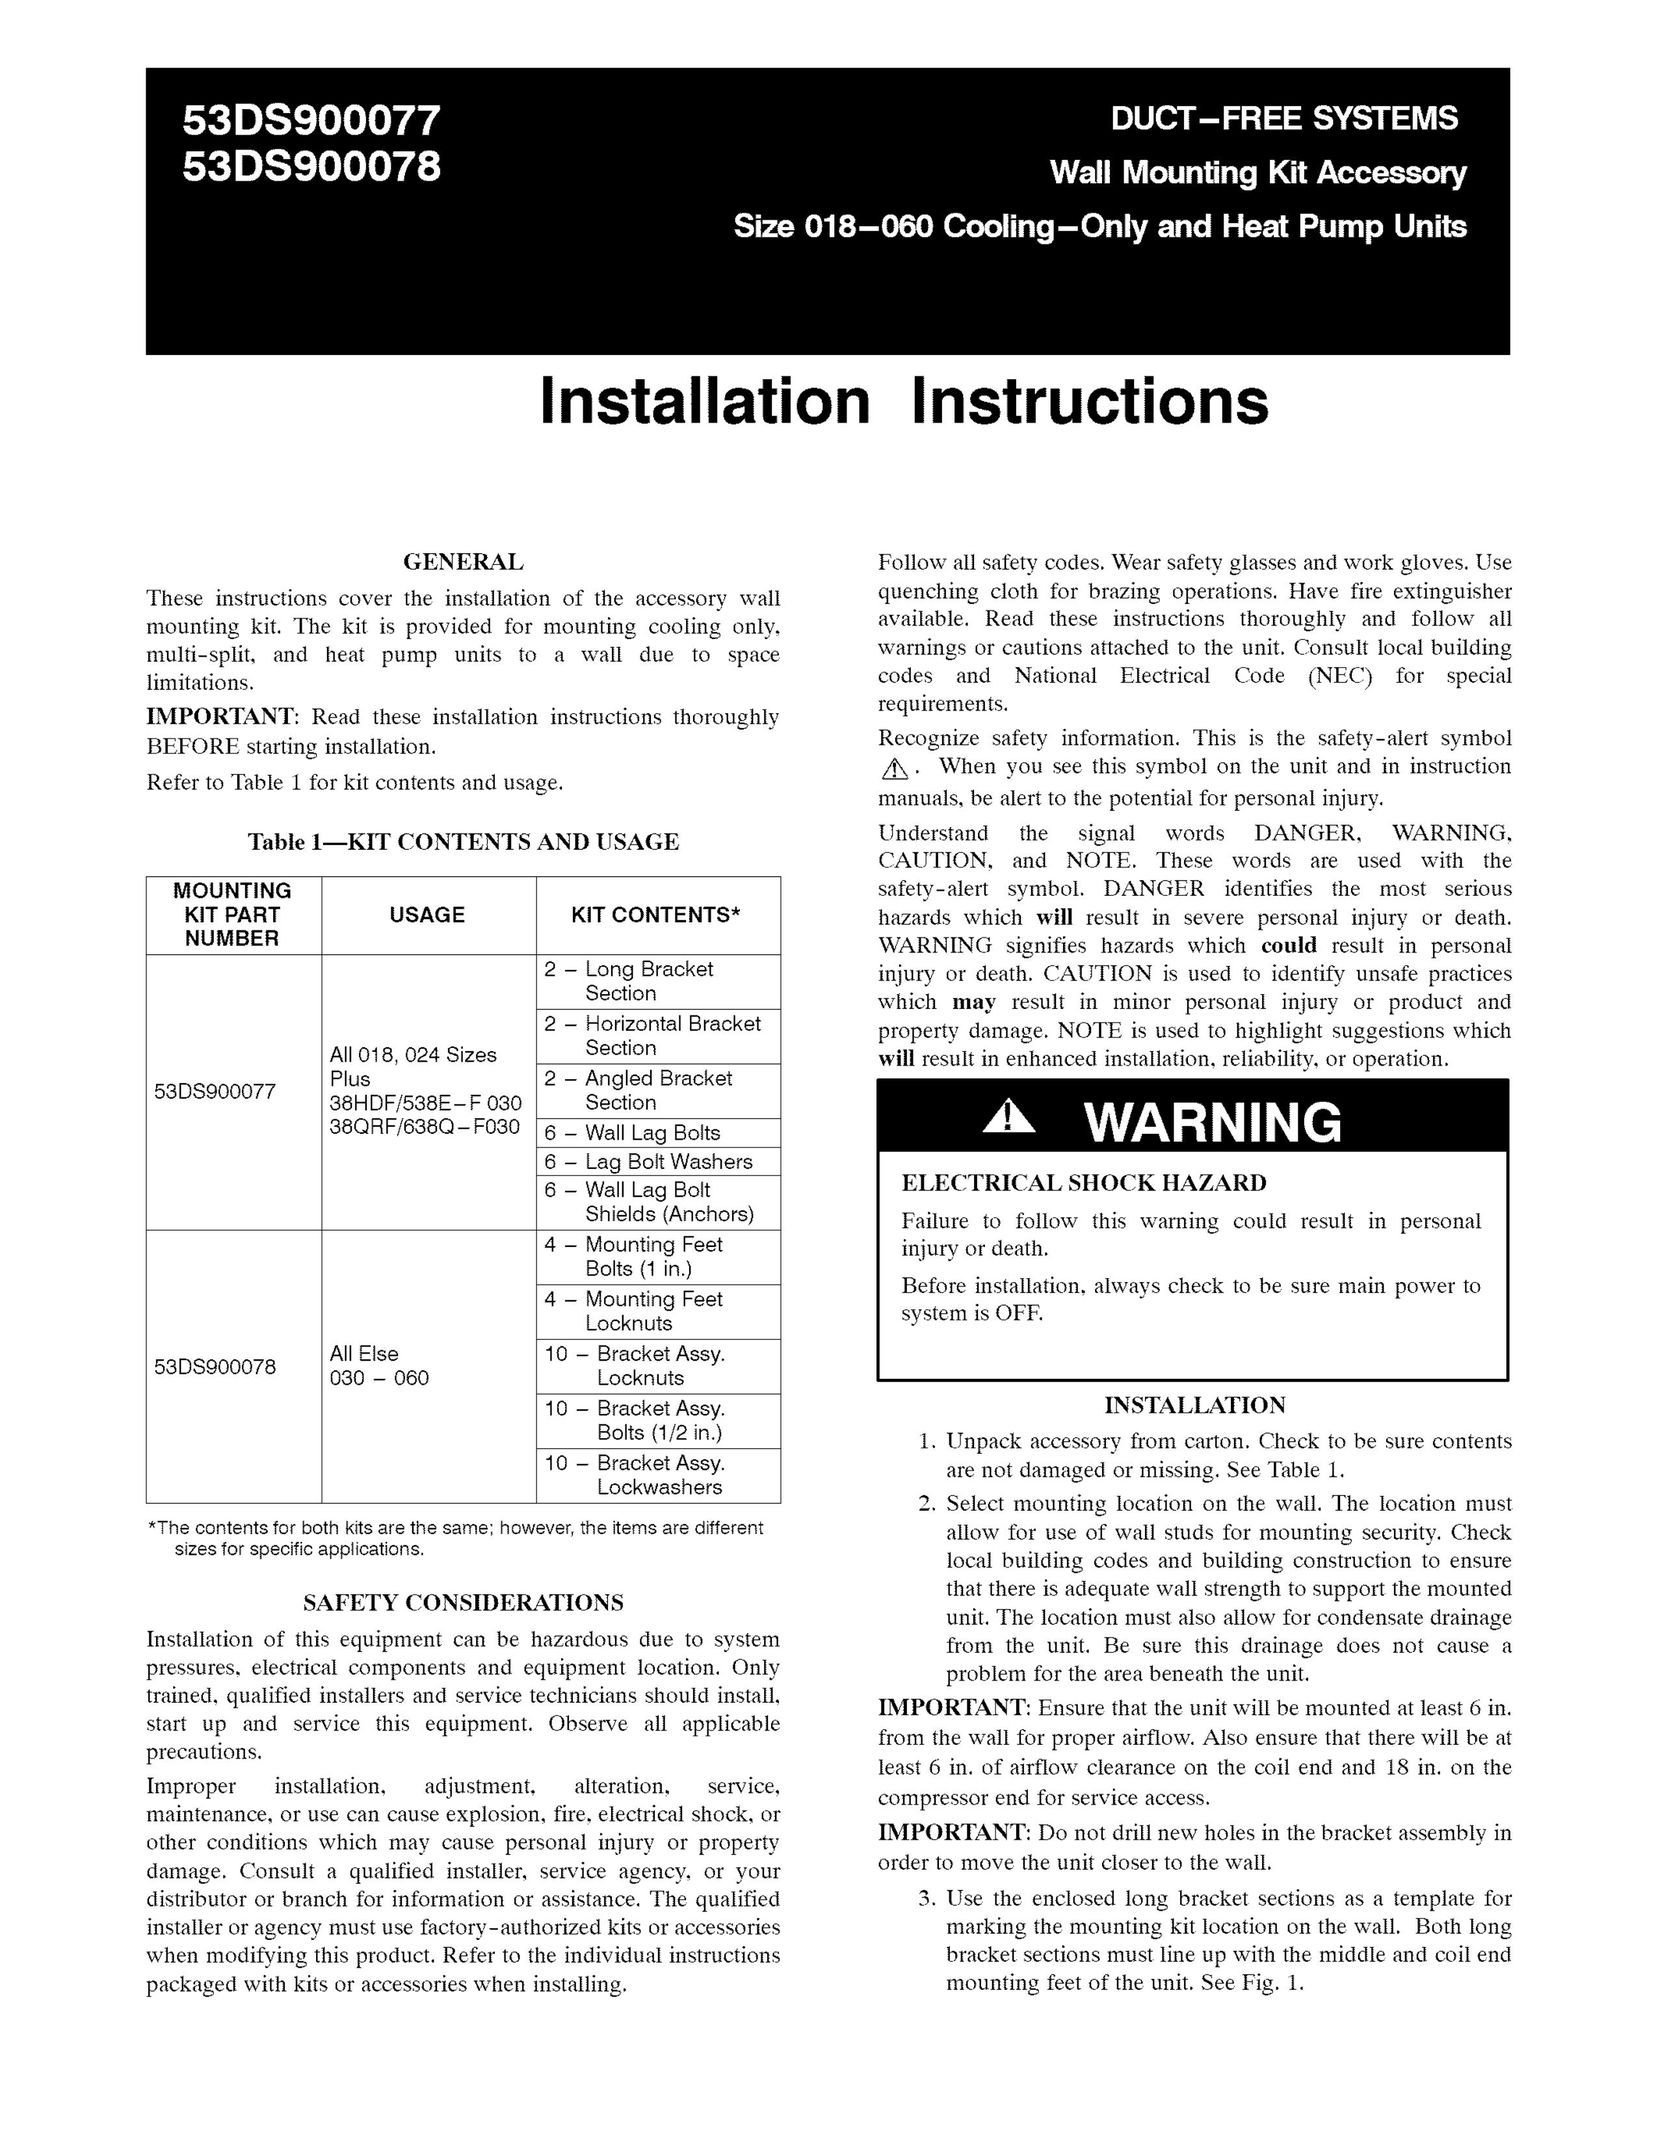 Sears 53DS900077 Air Conditioner User Manual